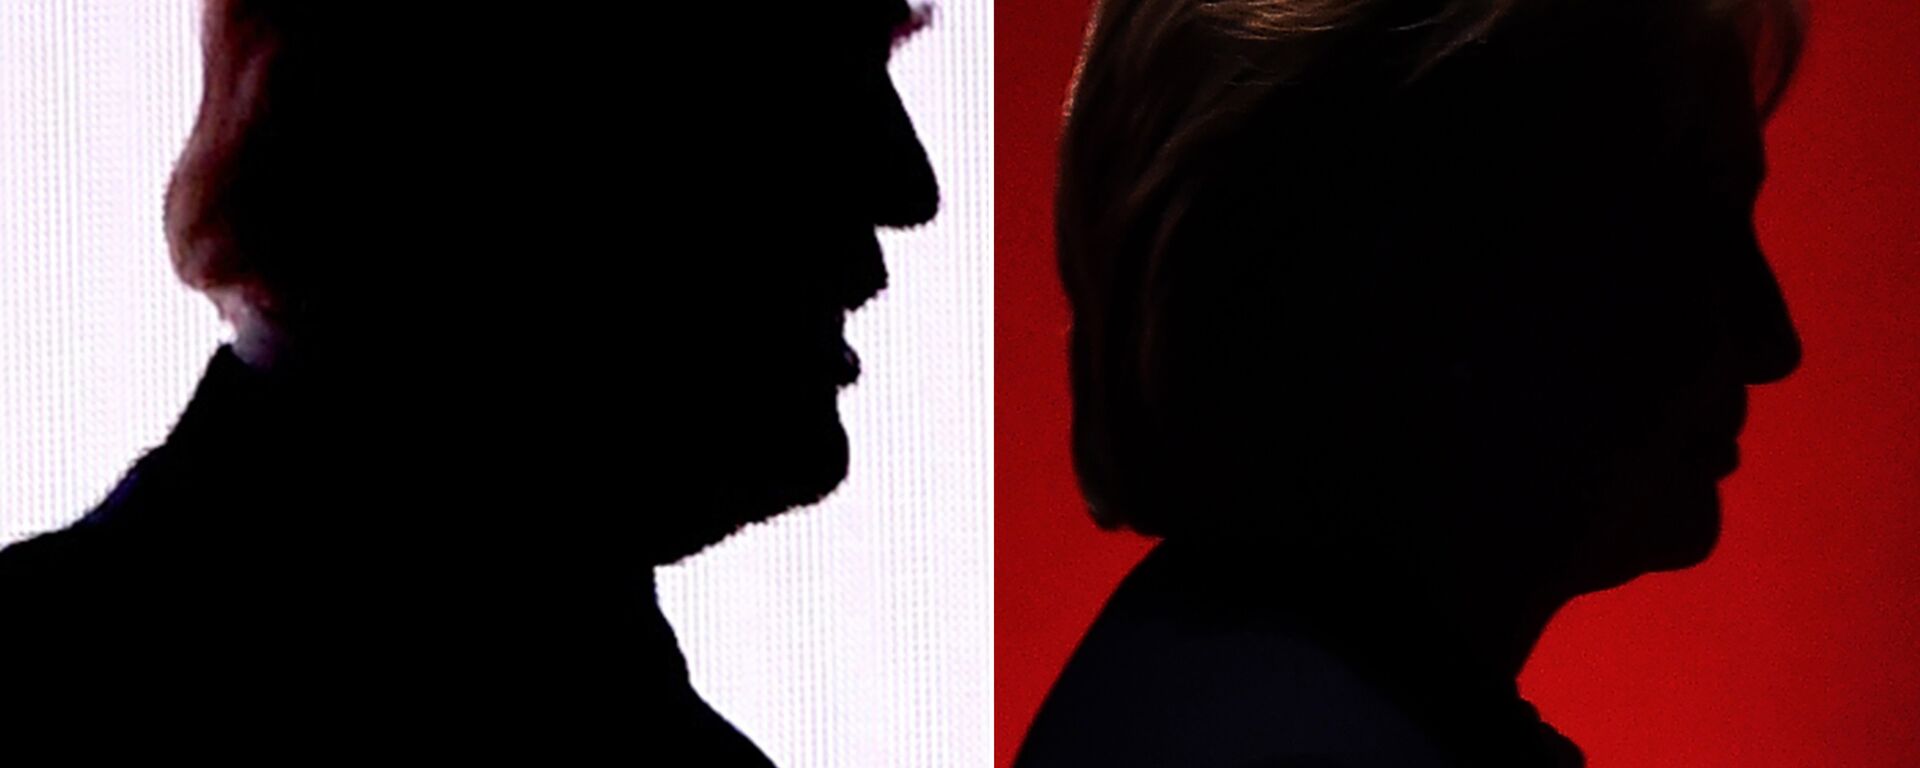 This combination of file photos shows the silhouettes of Republican presidential nominee Donald Trump(R) July 18, 2016 and Democratic presidential nominee Hillary Clinton on February 4, 2016. - Sputnik International, 1920, 14.12.2016